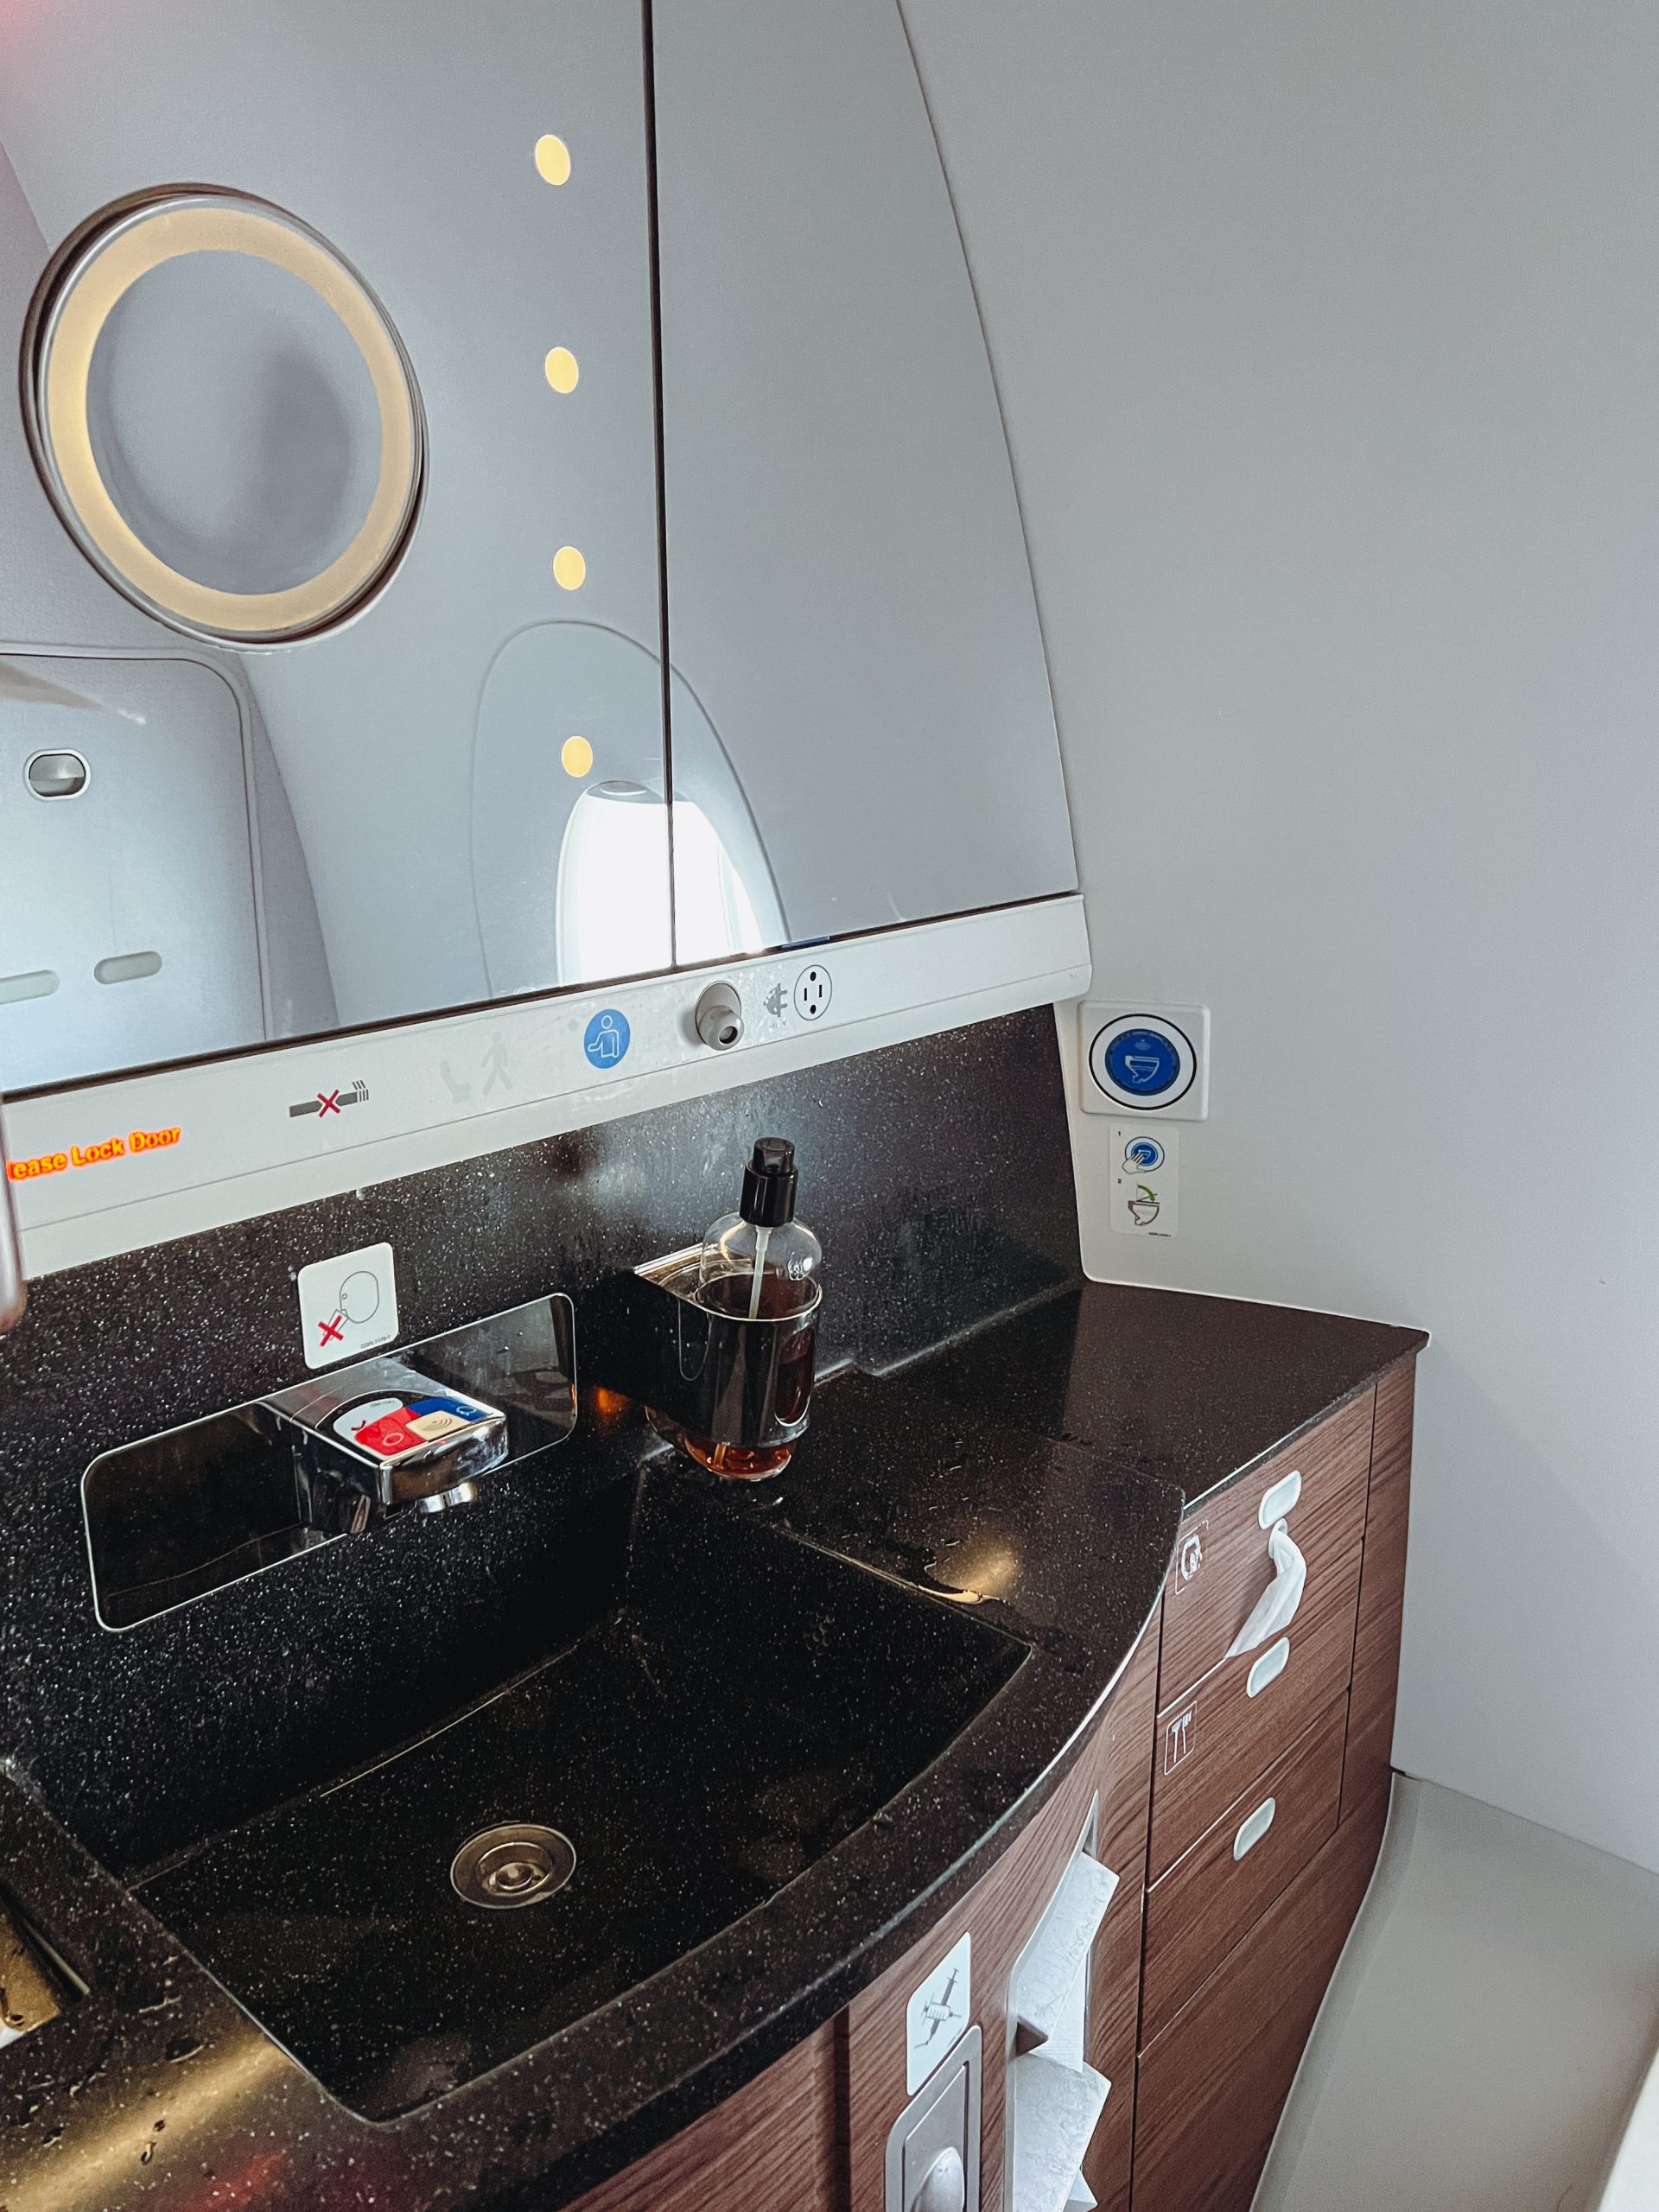 a sink in an airplane